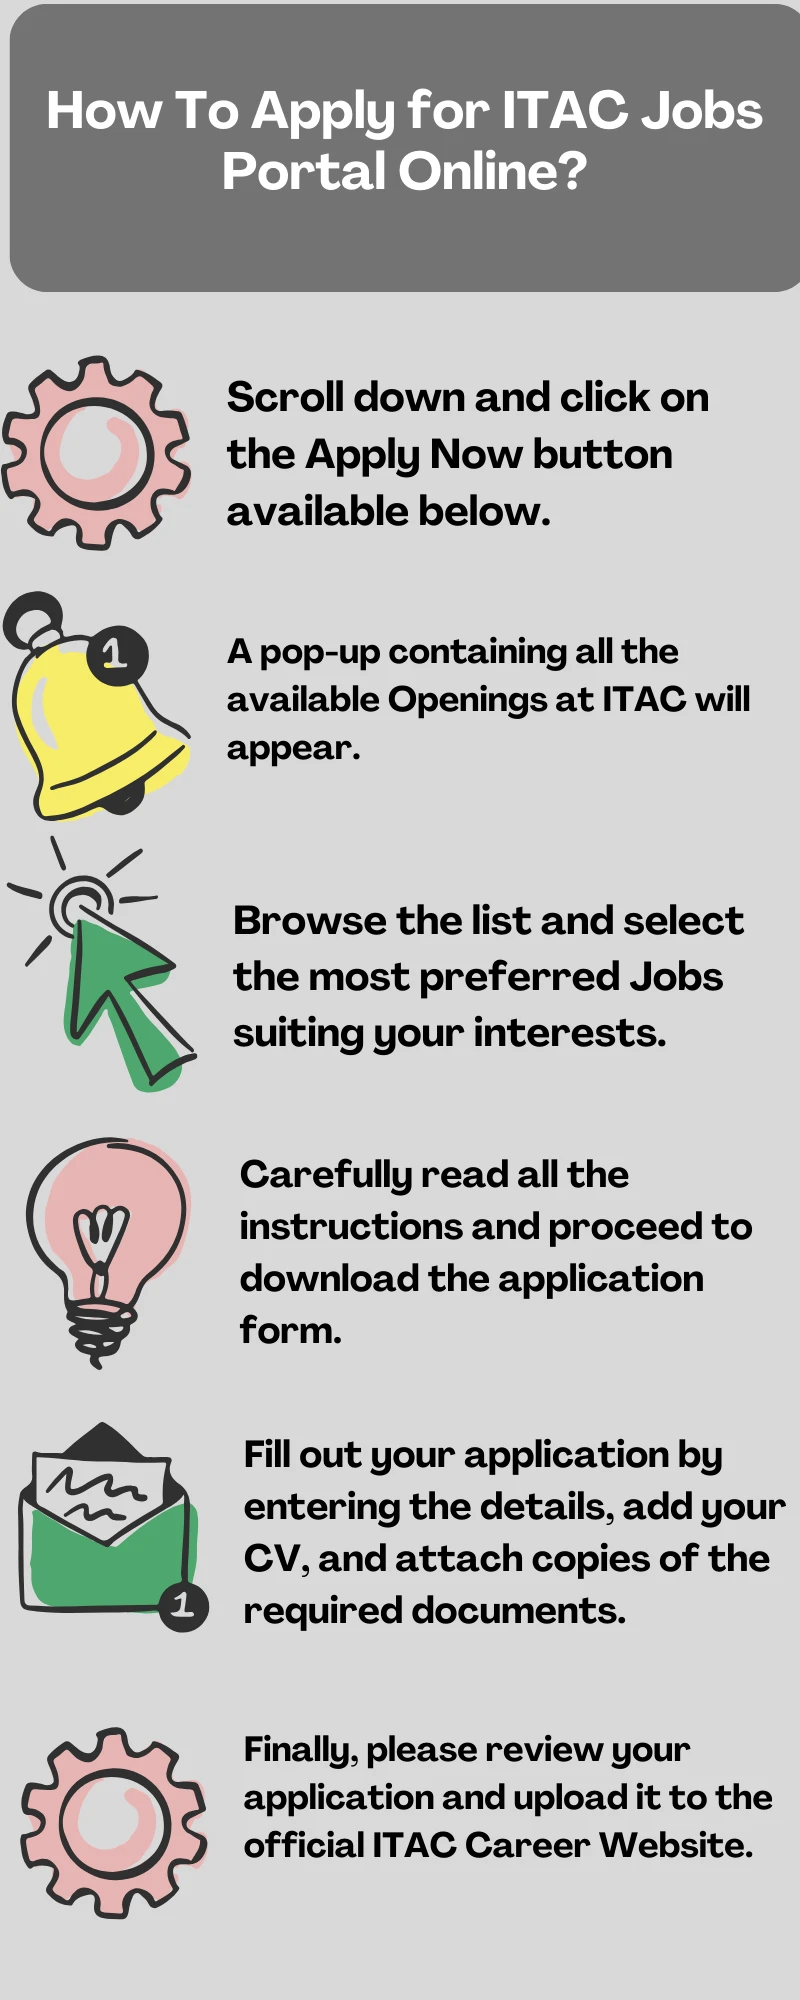 How To Apply for ITAC Jobs Portal Online?